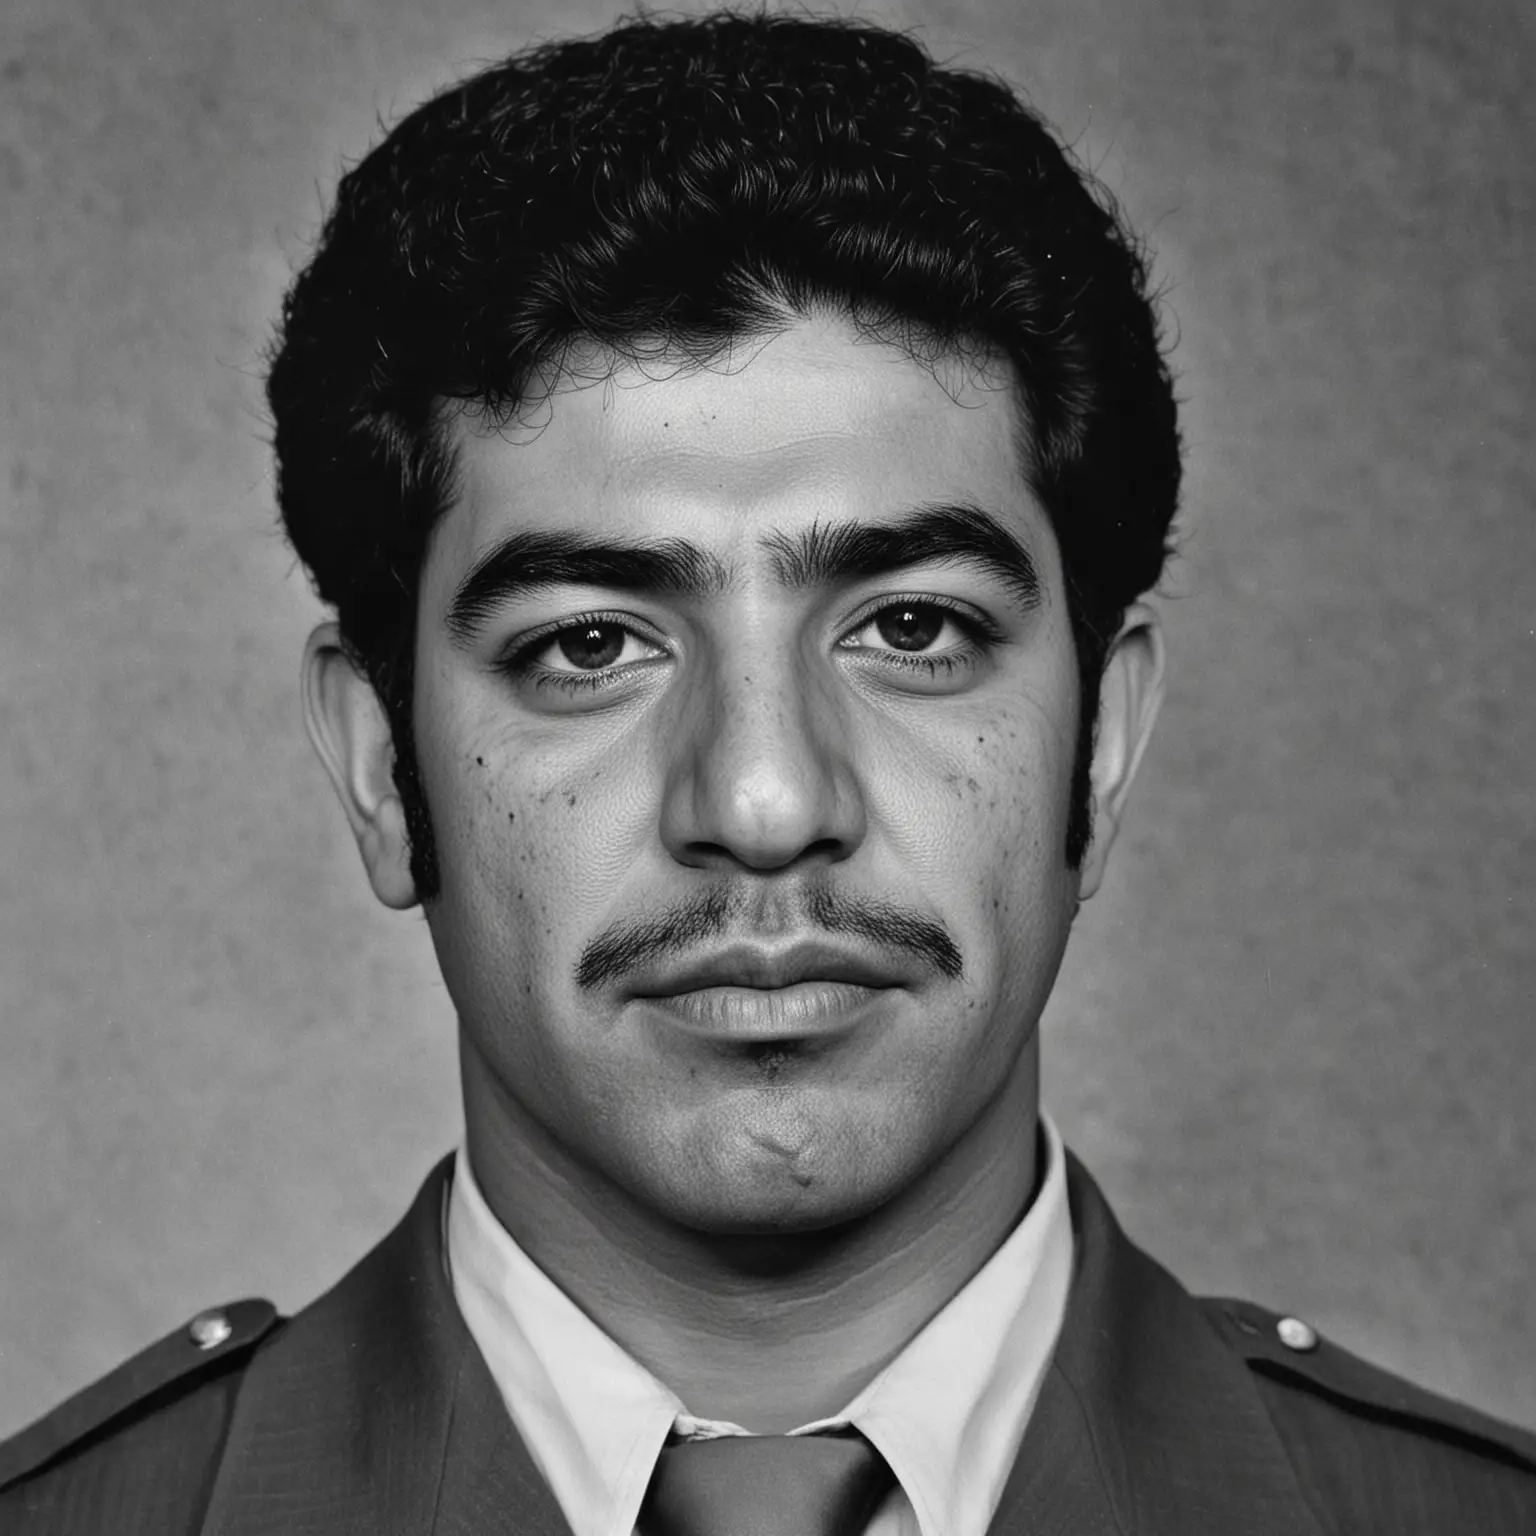 Black-and-white photo of young Saddam Hussein, showing him in his early 20s, with a serious expression